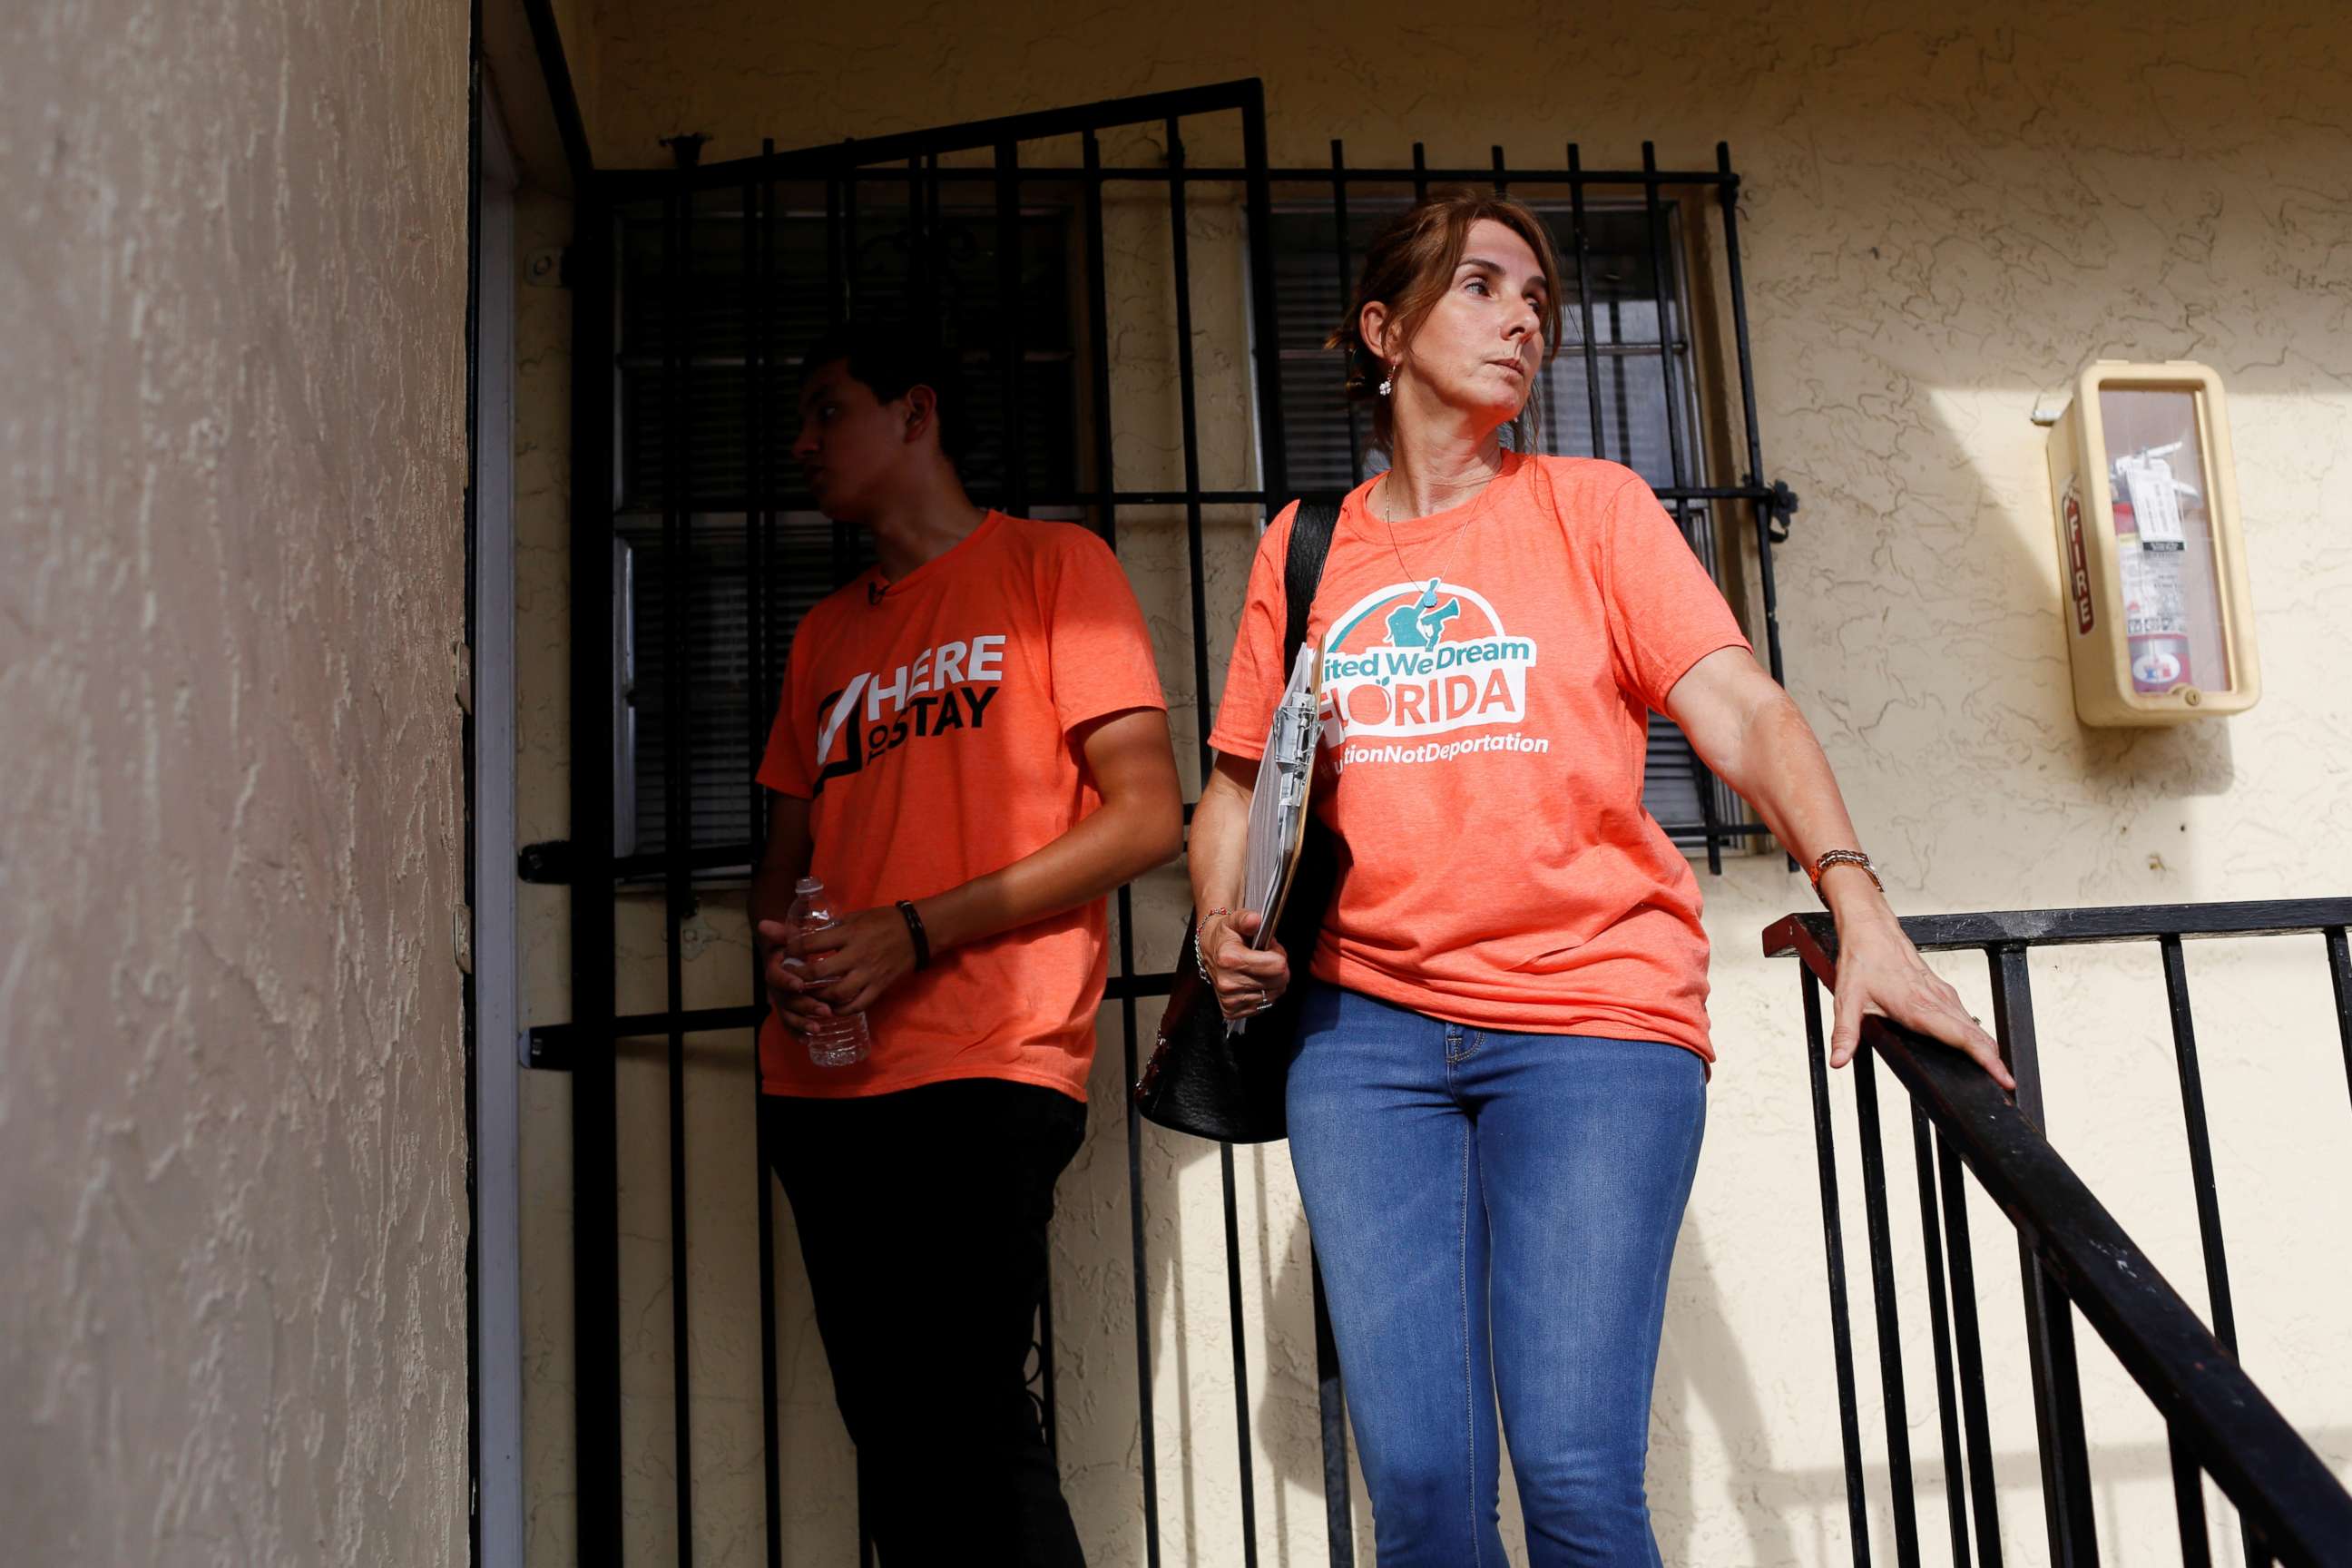 PHOTO: Immigration rights activists wait in front of the door of a house as communities braced for a reported wave of deportation raids across the United States by Immigration and Customs Enforcement officers, in Miami, July 13, 2019. 